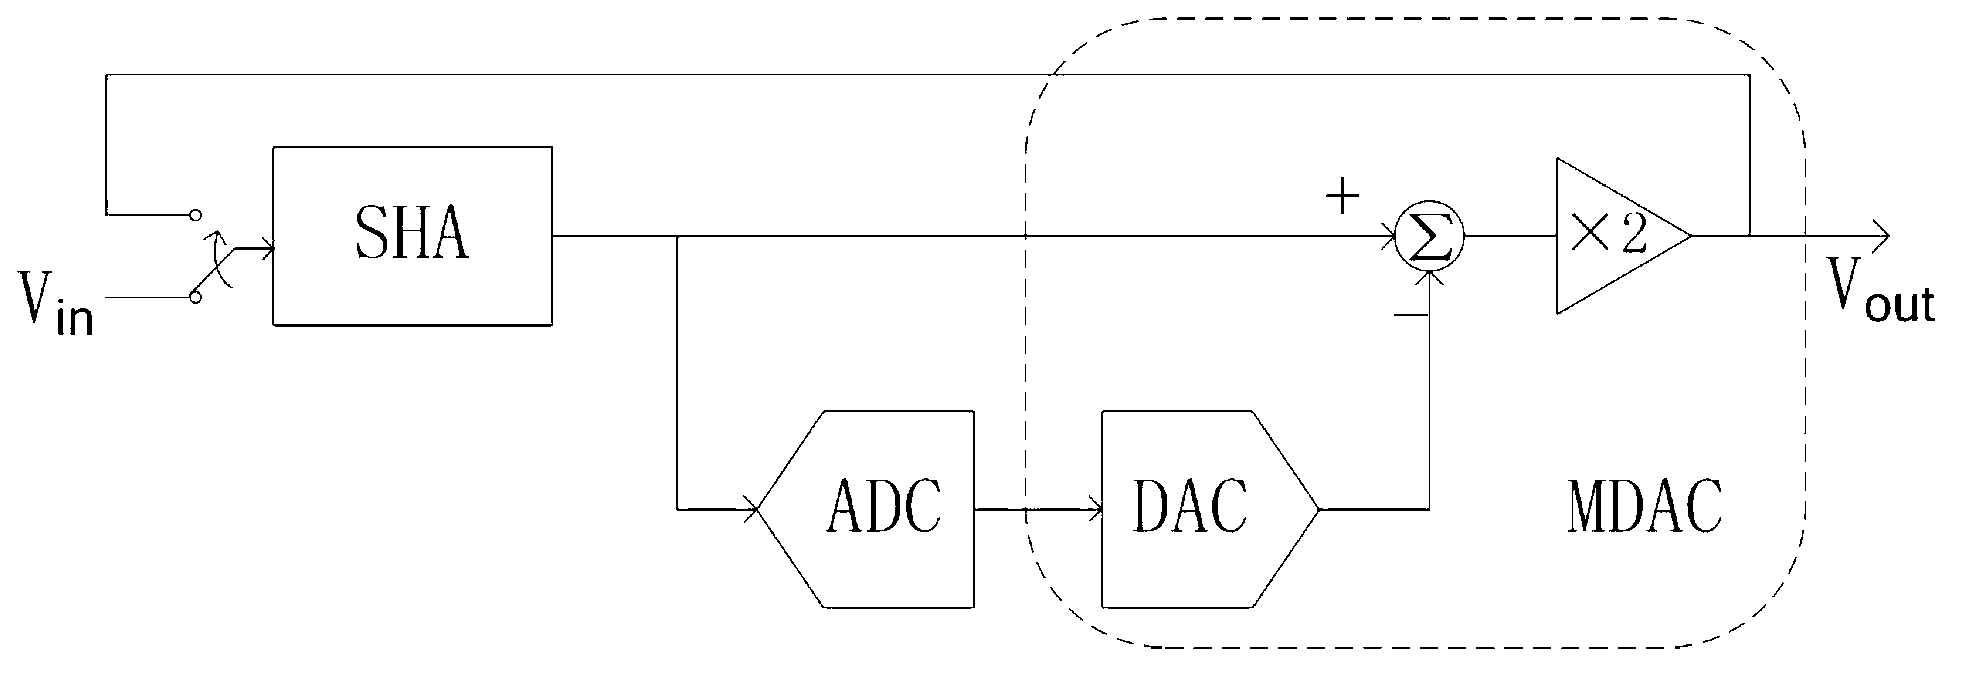 Circulation analog-to-digital converter combined with TDC (time-to-digital converter)